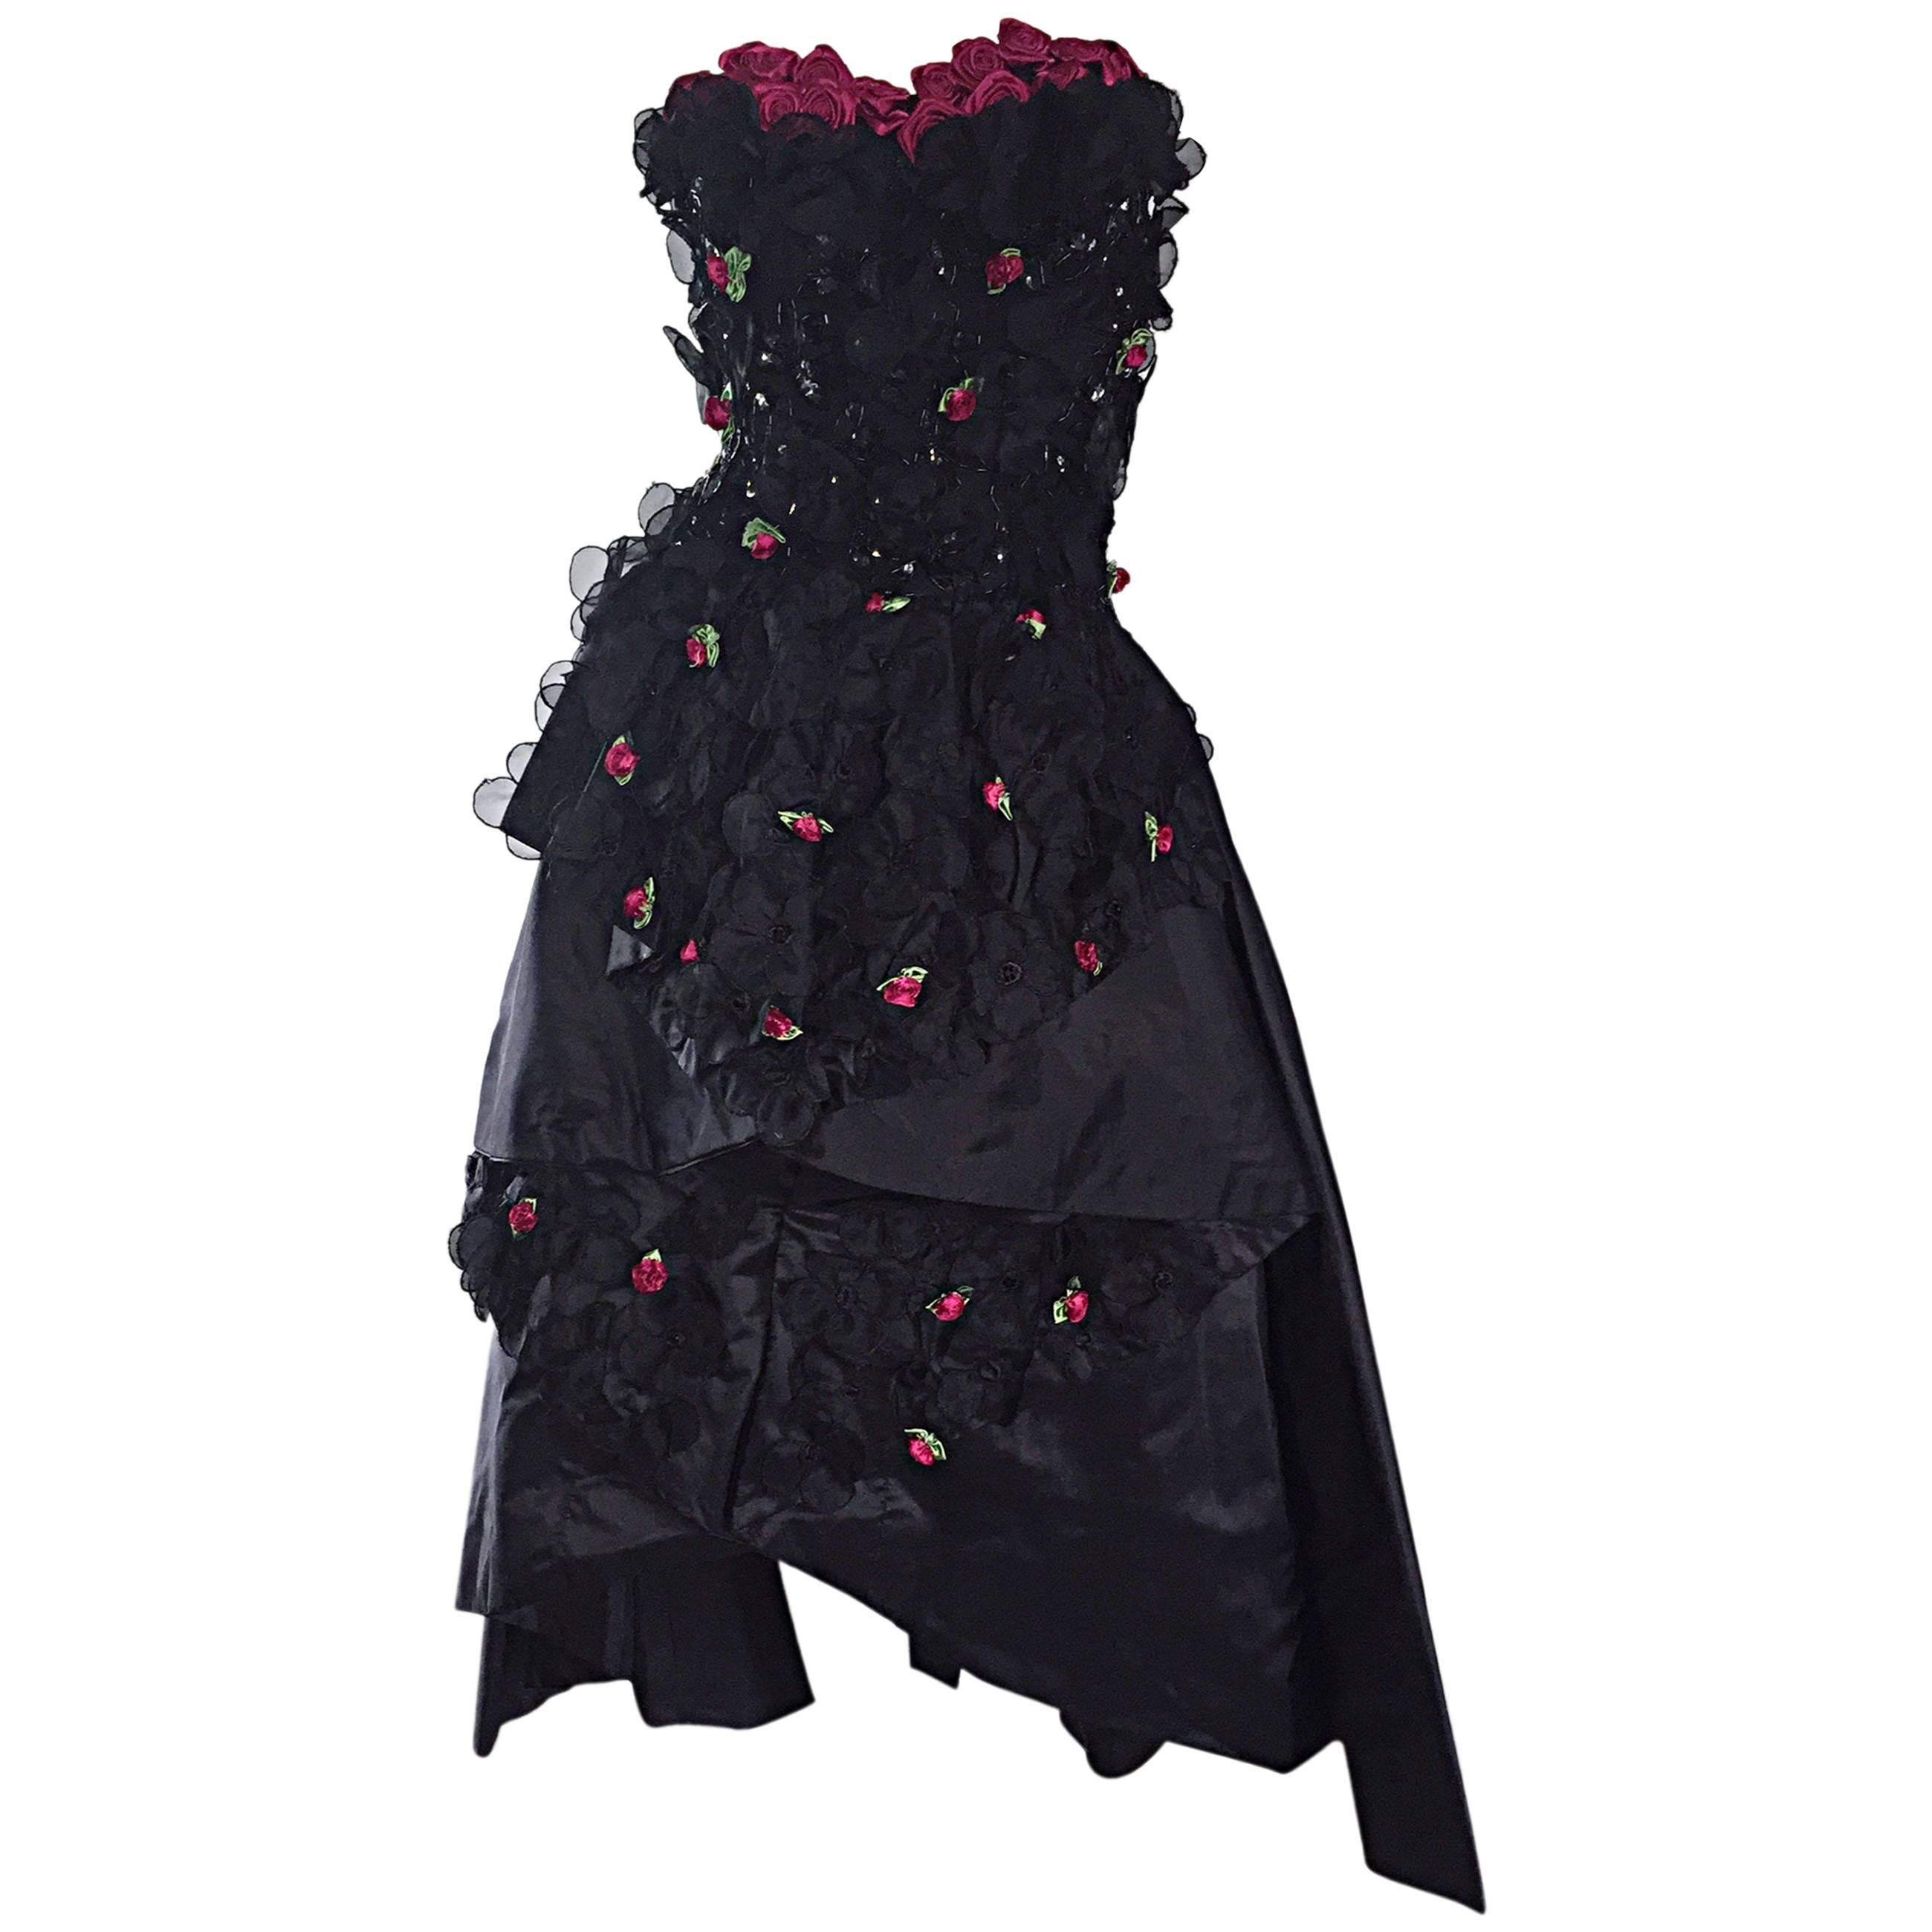 Exceptional 1950s Vintage Black Silk Taffeta Hi - Lo Dress w/ Rosettes and Lace For Sale